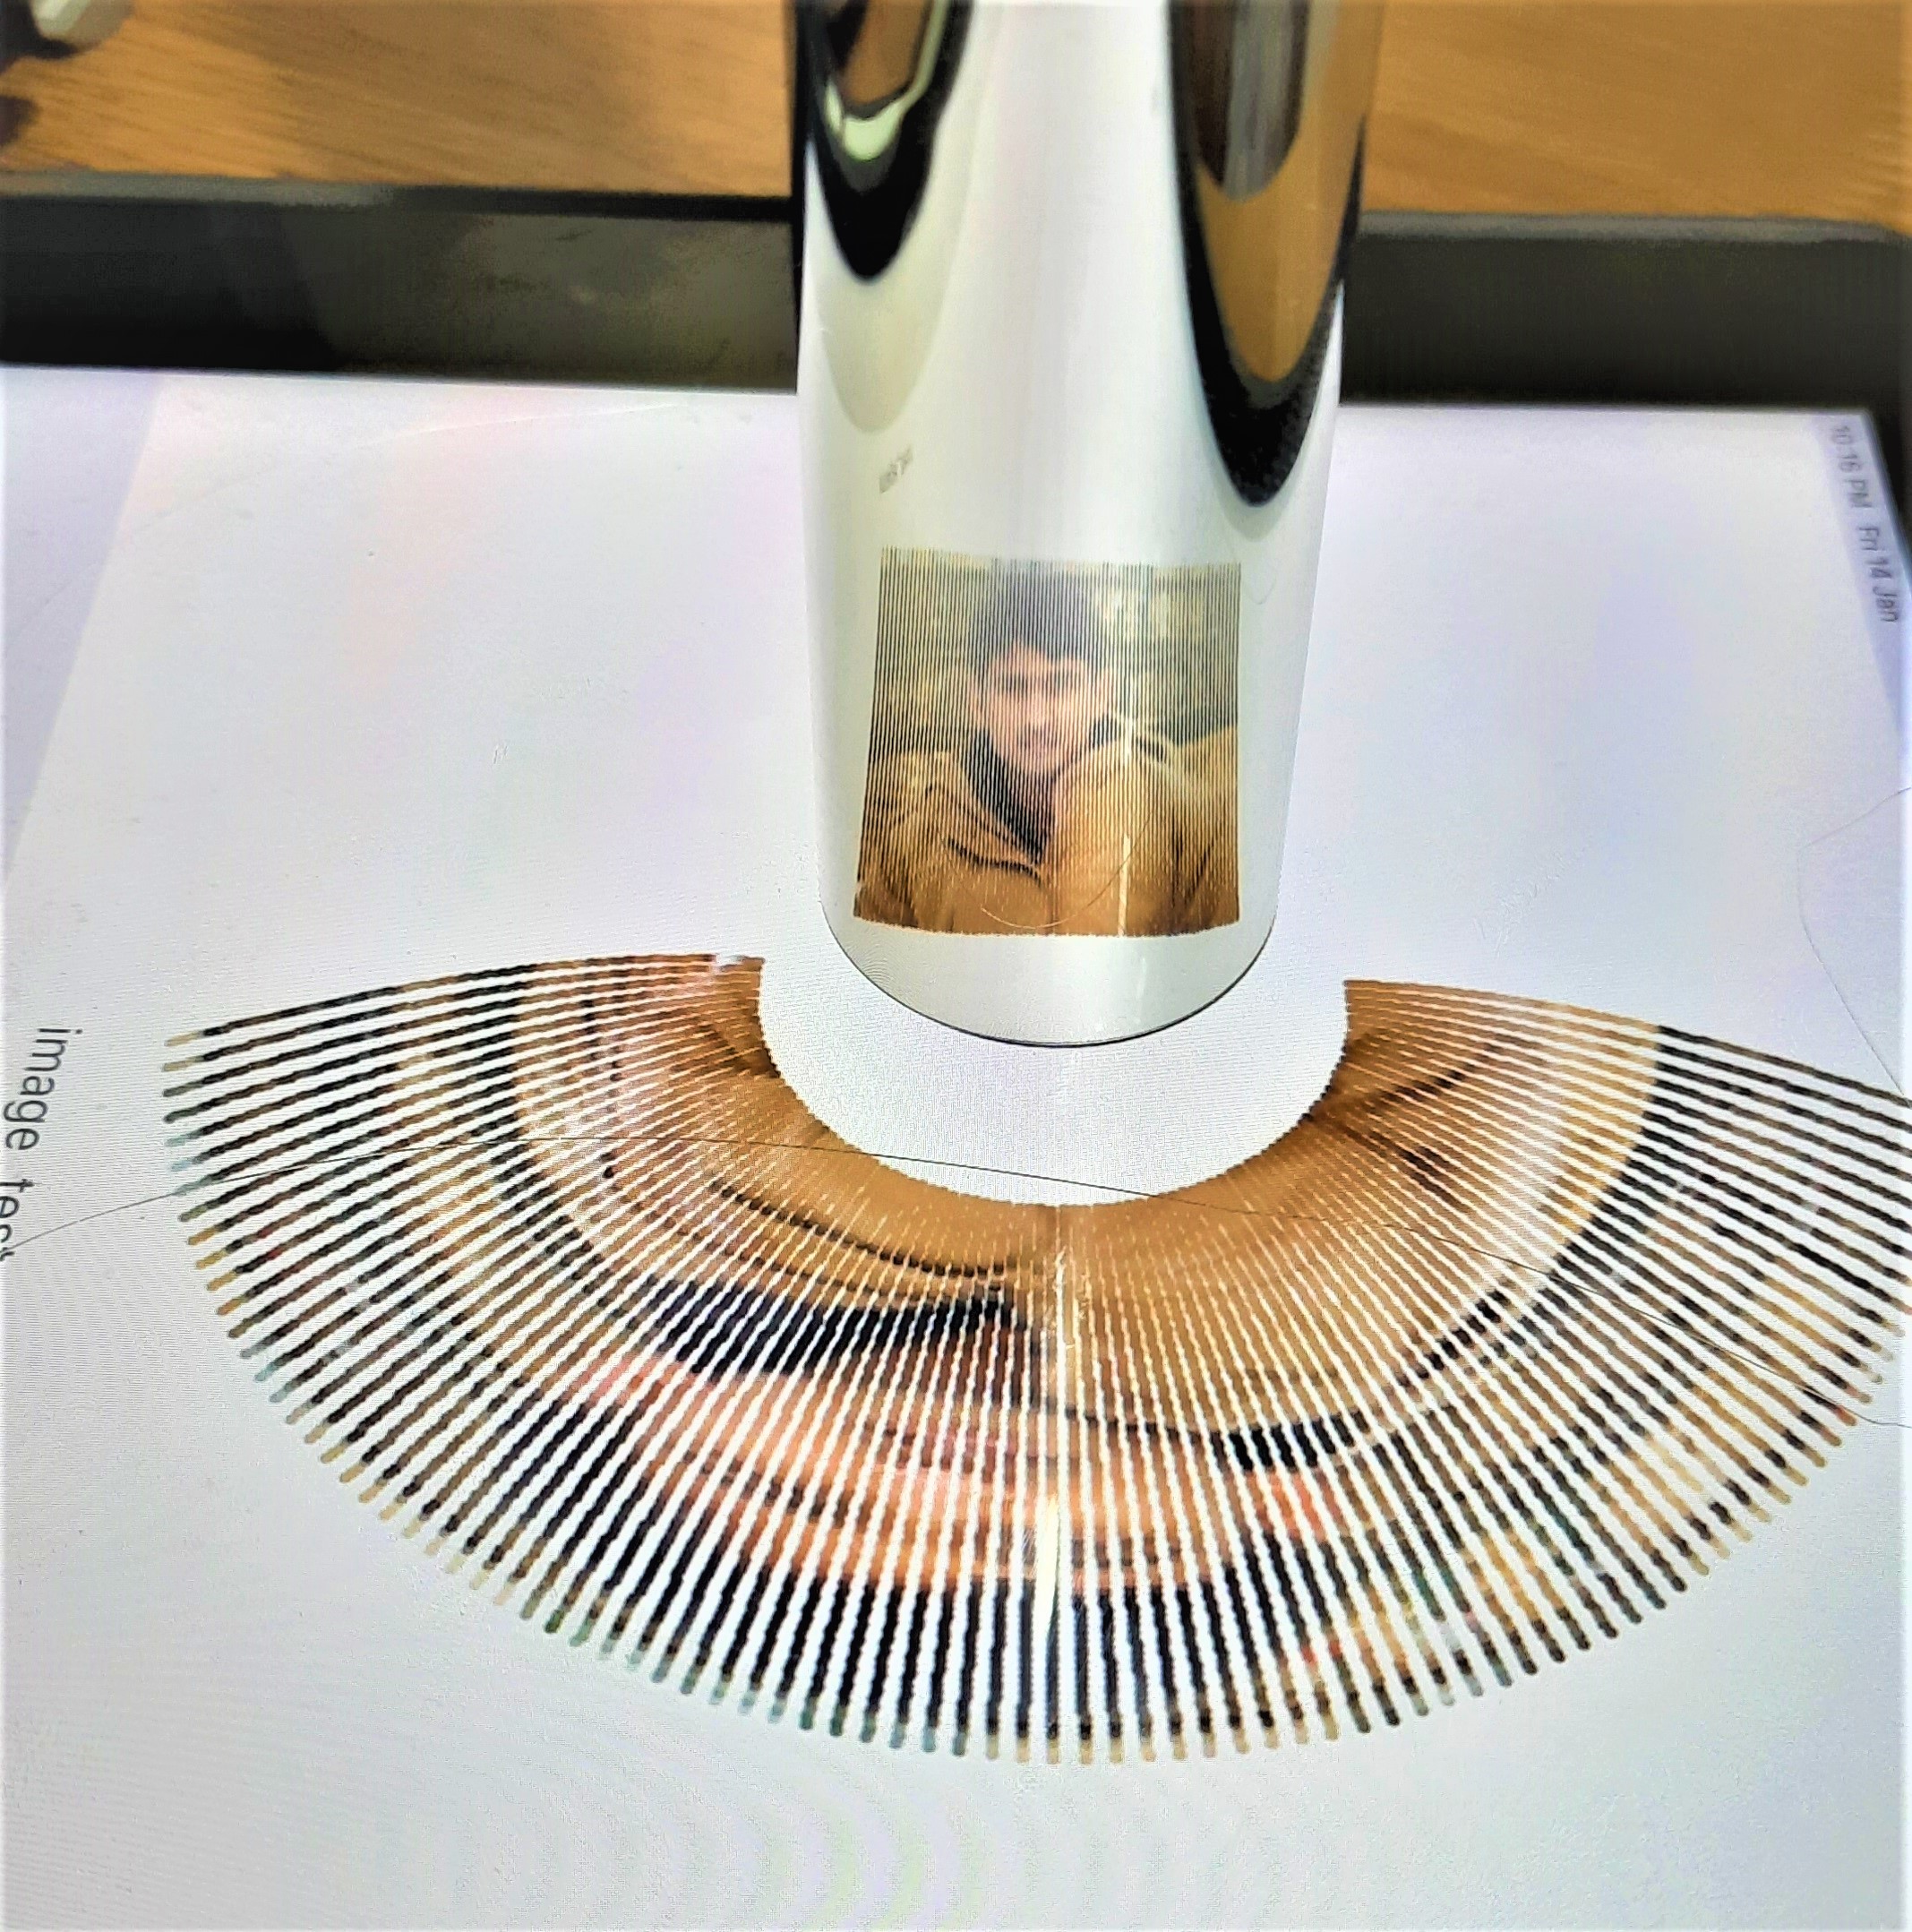 Anamorphosis: Reflection from a Cylindrical Mirror